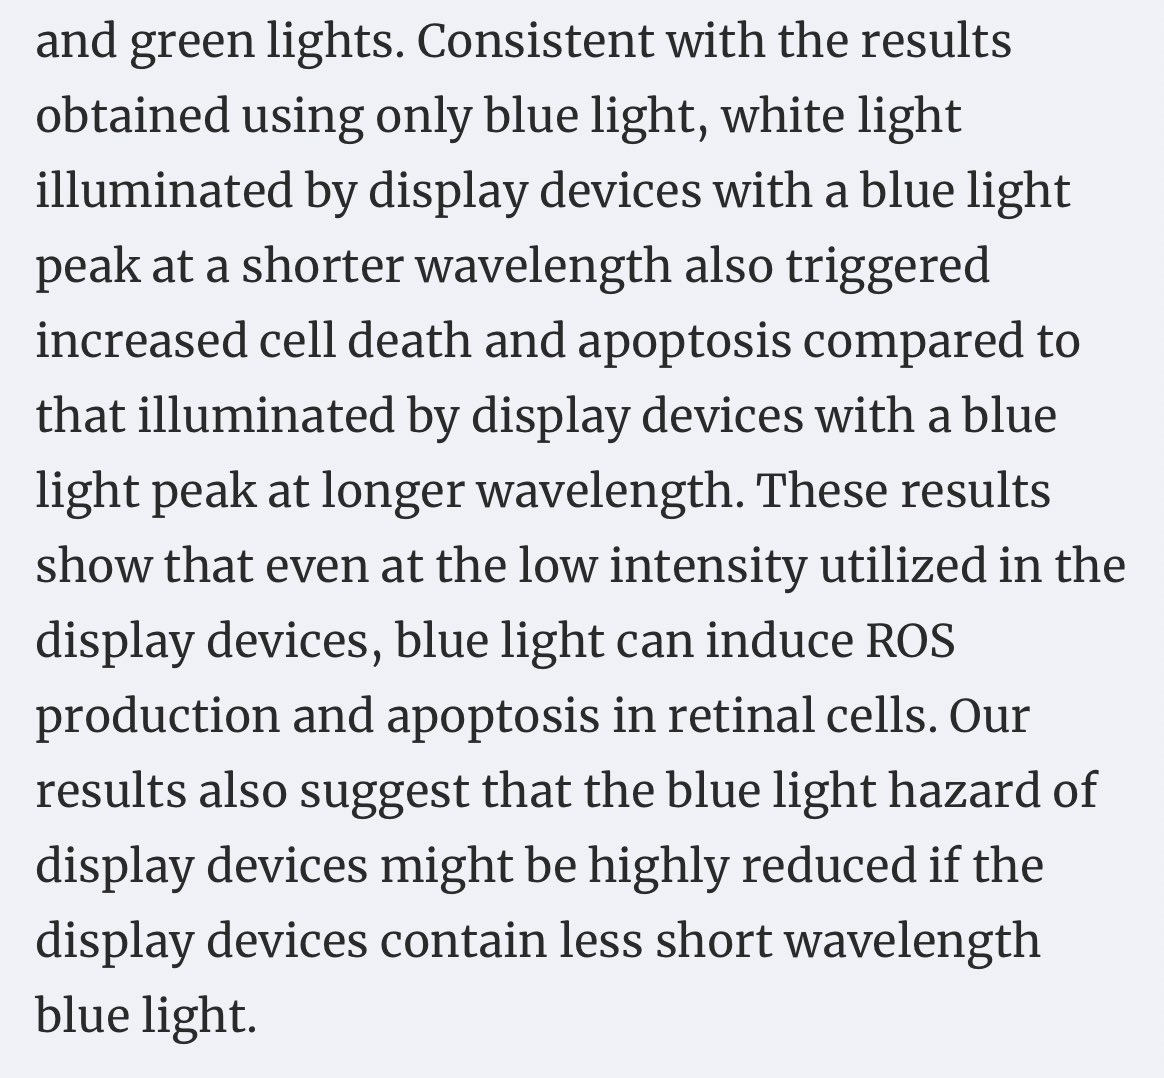 Blue light effect on retinal pigment epithelial cells by display devices  https://pubmed.ncbi.nlm.nih.gov/28386617/ Full link to study:  https://twin.sci-hub.se/6321/b1304c9beeeb89419273d071b74a2bf9/moon2017.pdfBlue light from devices degenerates the retina.